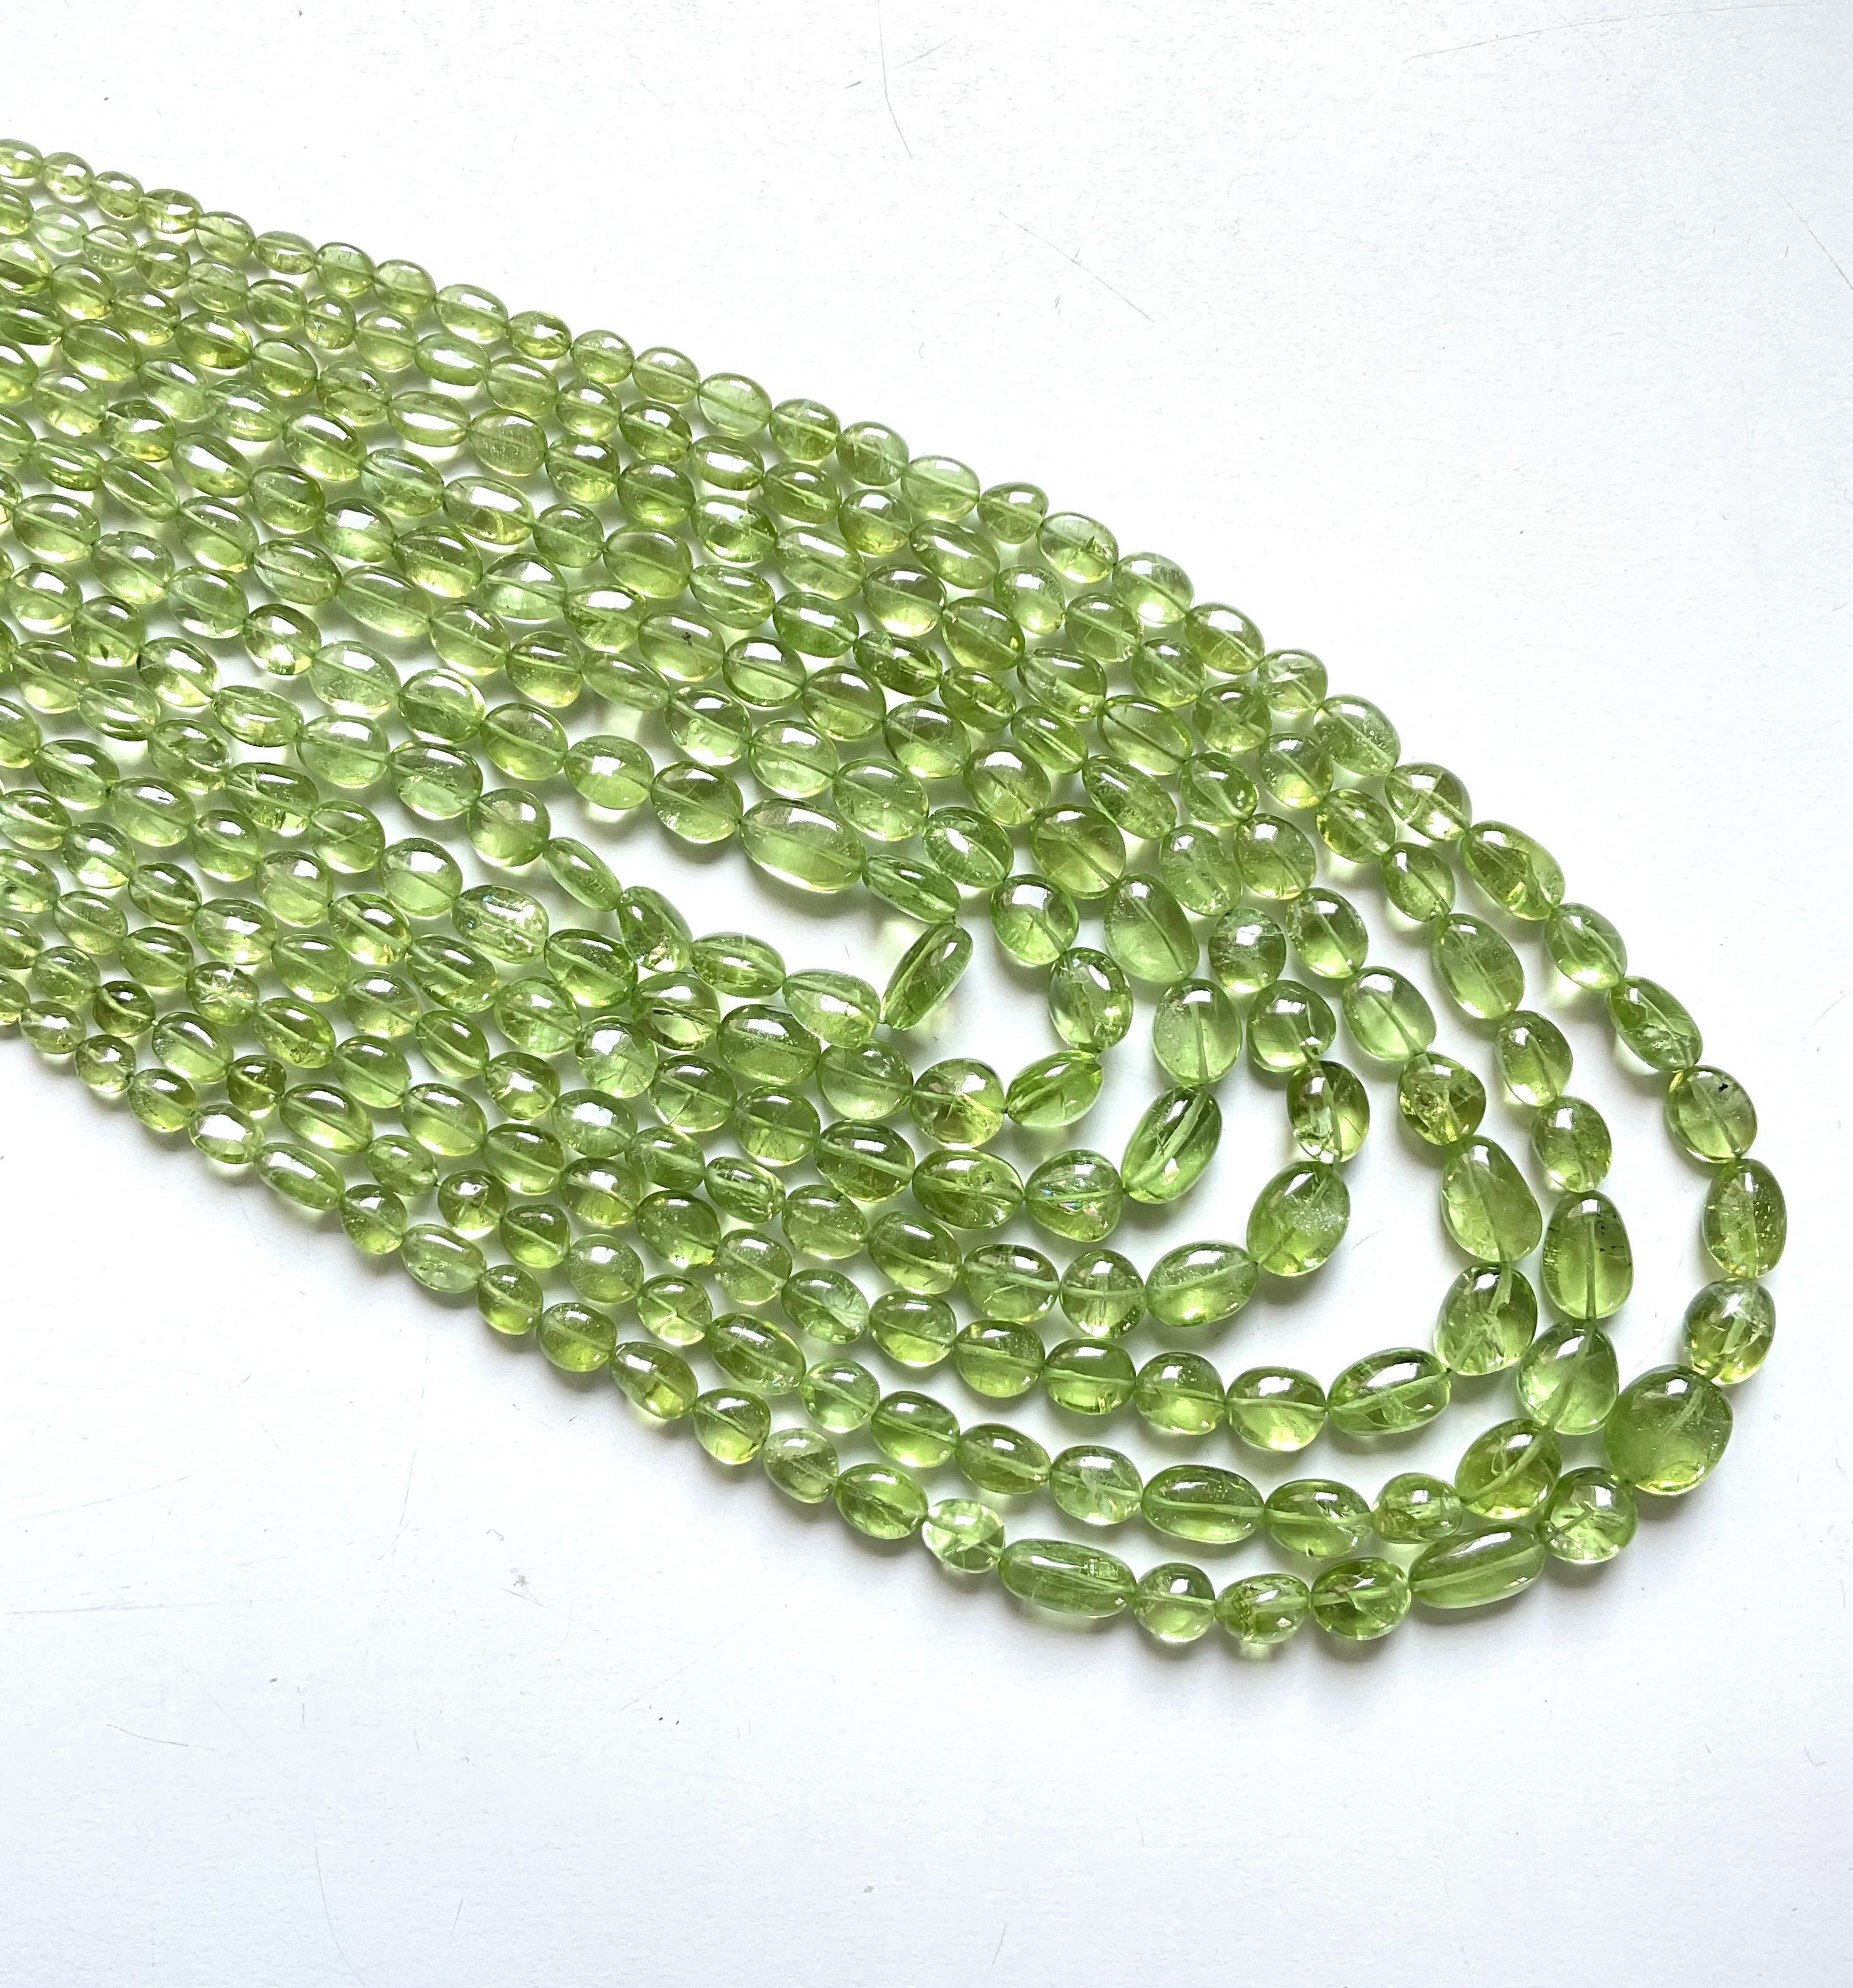 1055.55 carat apple green peridot top quality plain tumbled natural necklace gem For Sale 1